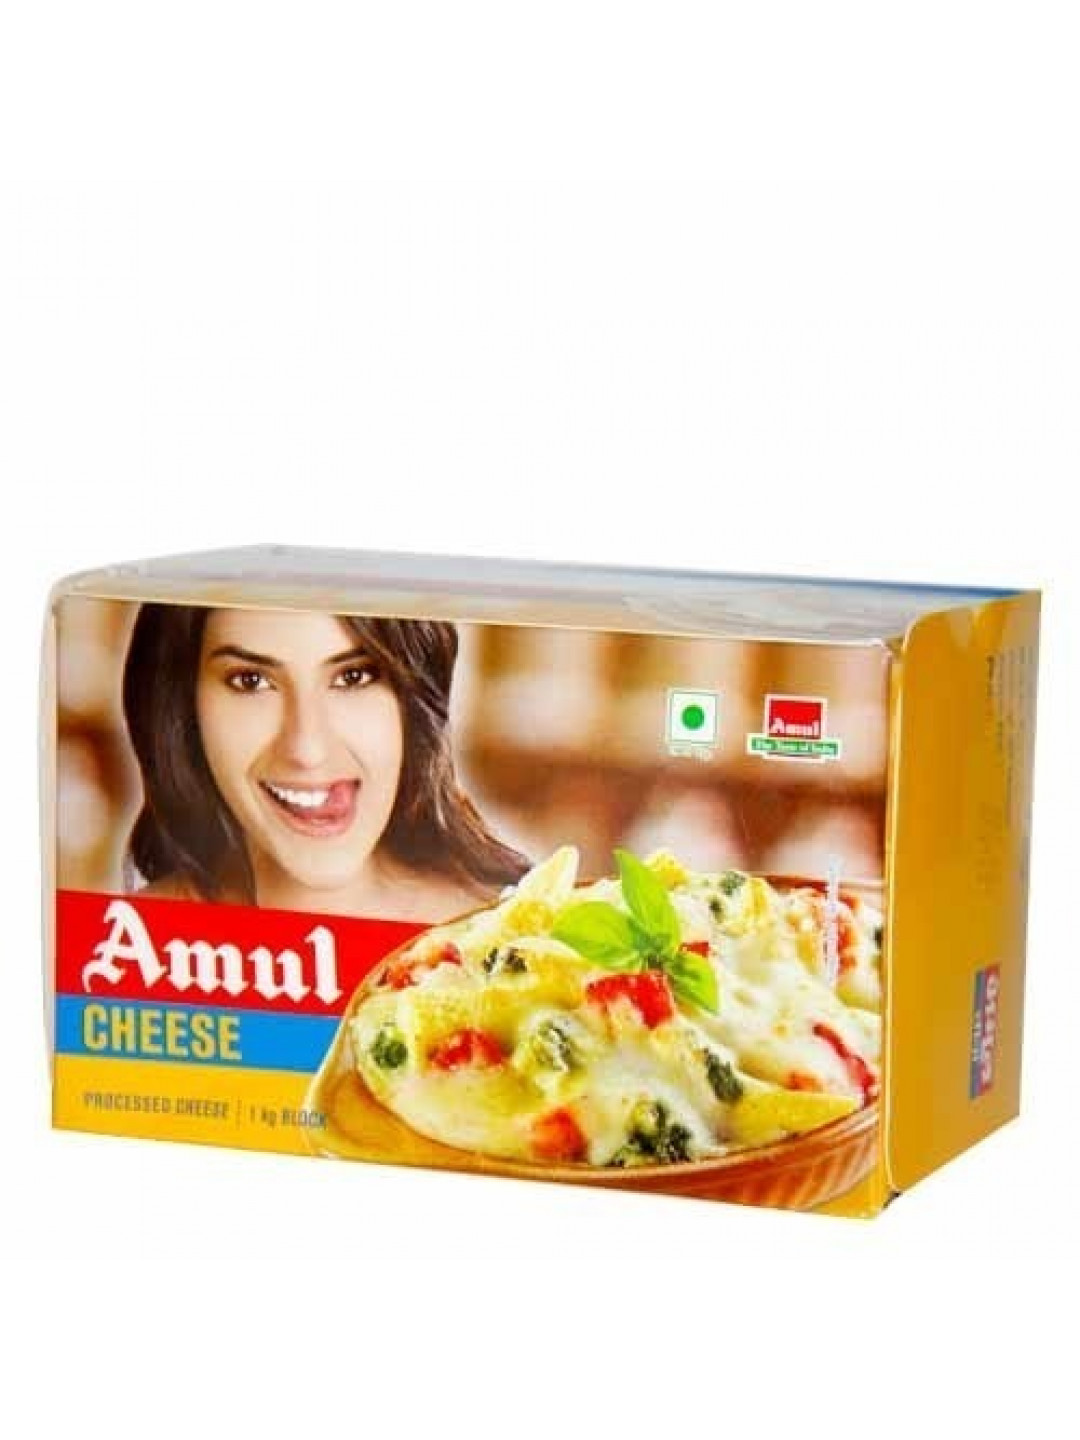 Amul cheese cube